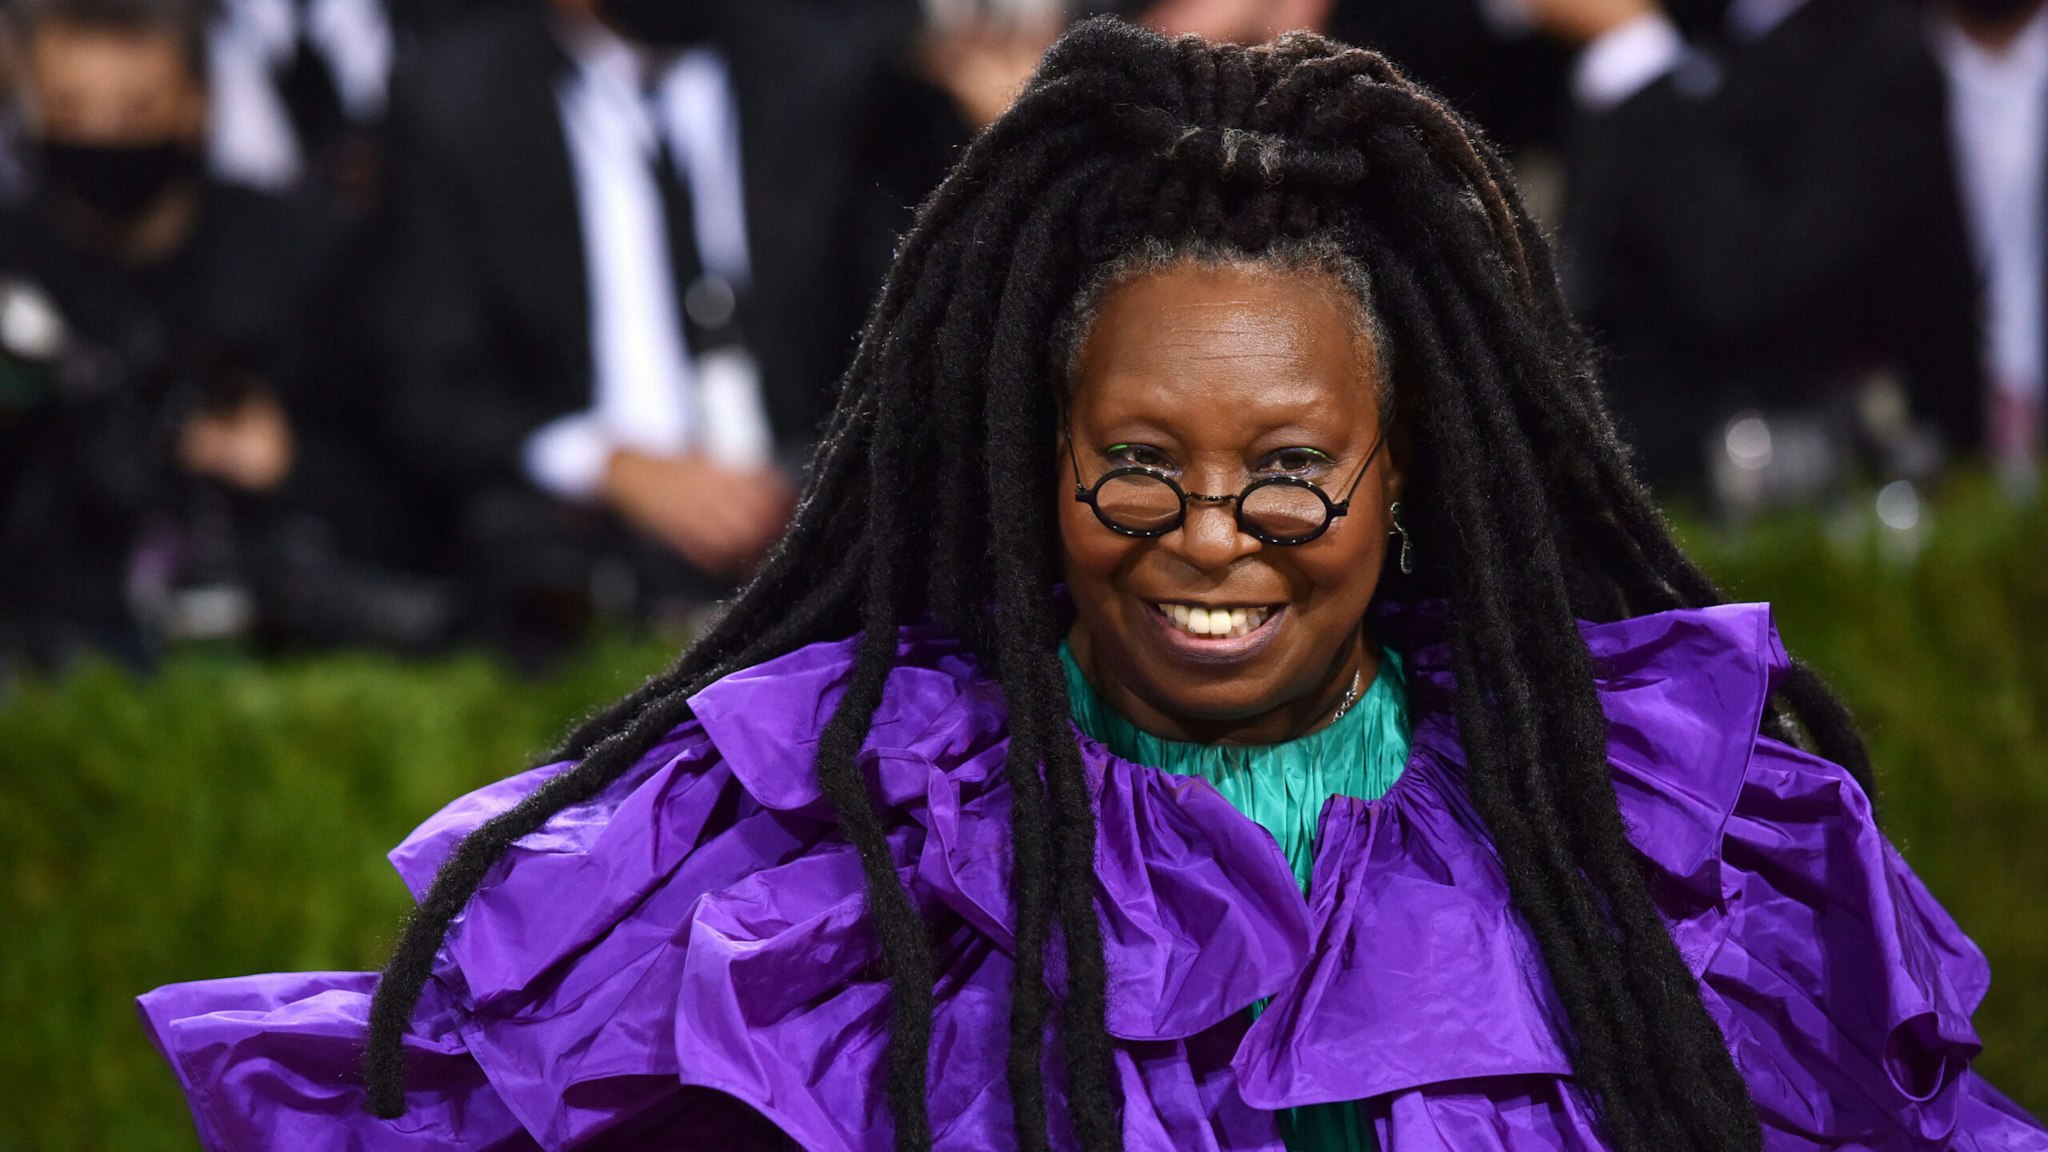 NEW YORK, NEW YORK - SEPTEMBER 13: Whoopi Goldberg attends 2021 Costume Institute Benefit - In America: A Lexicon of Fashion at the Metropolitan Museum of Art on September 13, 2021 in New York City.